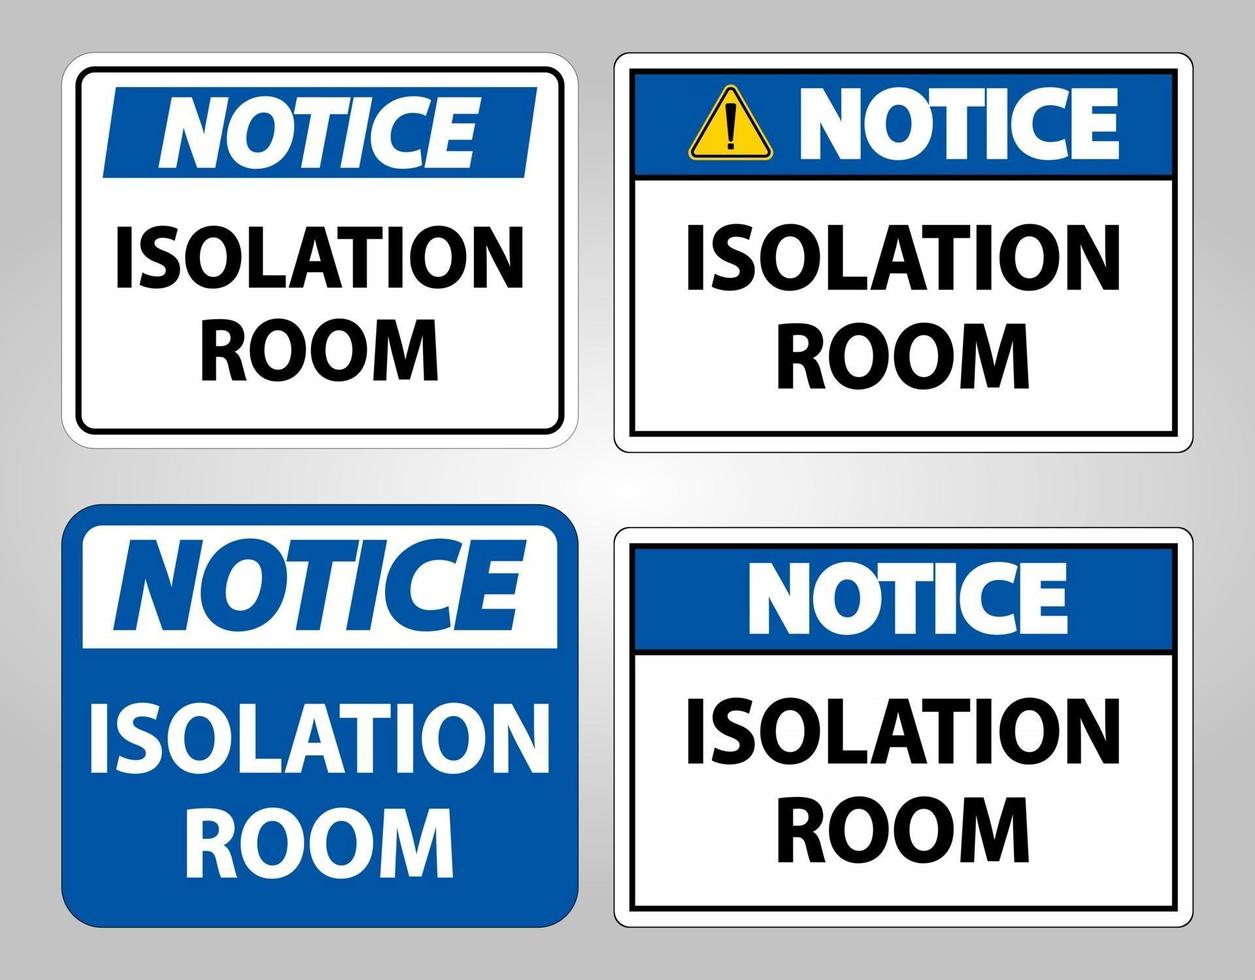 Notice Isolation room Sign vector